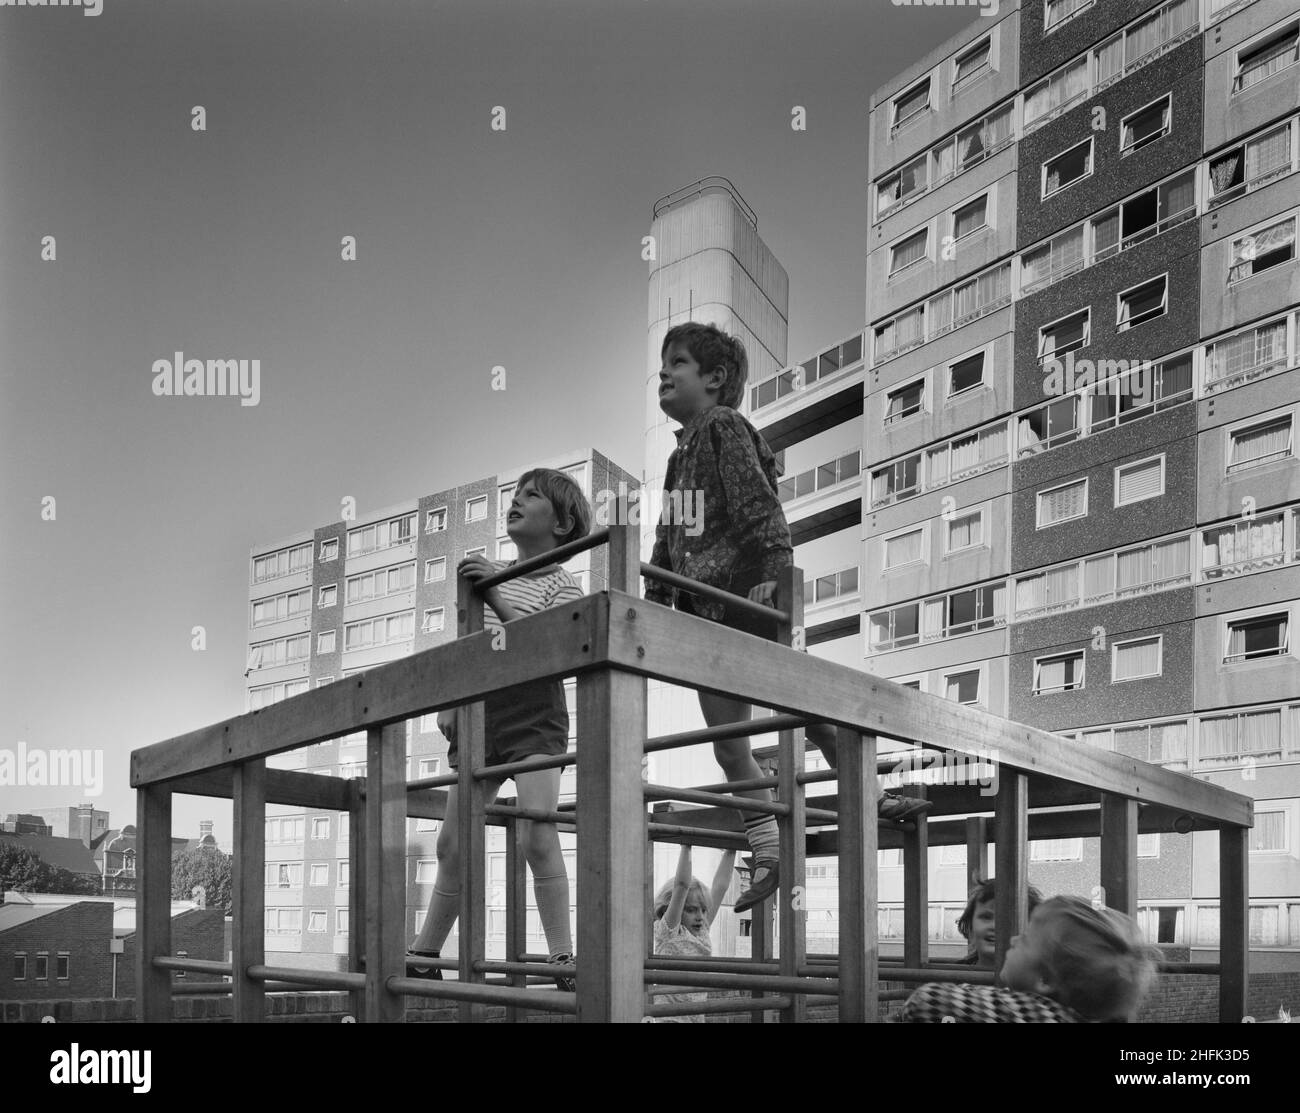 Doddington Estate, Battersea, Wandsworth, London, 08/09/1971. Children playing on a climbing frame on the Doddington Estate, with a 10-storey and 13-storey block of flats behind, built using the 12M Jespersen system. The Doddington Estate, just off Battersea Park Road, was designed by architects Emberton, Tardrew &amp; Partners. The estate, which included tower blocks of flats, was built between 1967-71 by Laing for Wandsworth London Borough Council. It was built using their 12M Jespersen building system, consisting of prefabricated parts and precast concrete panels produced at their concrete Stock Photo